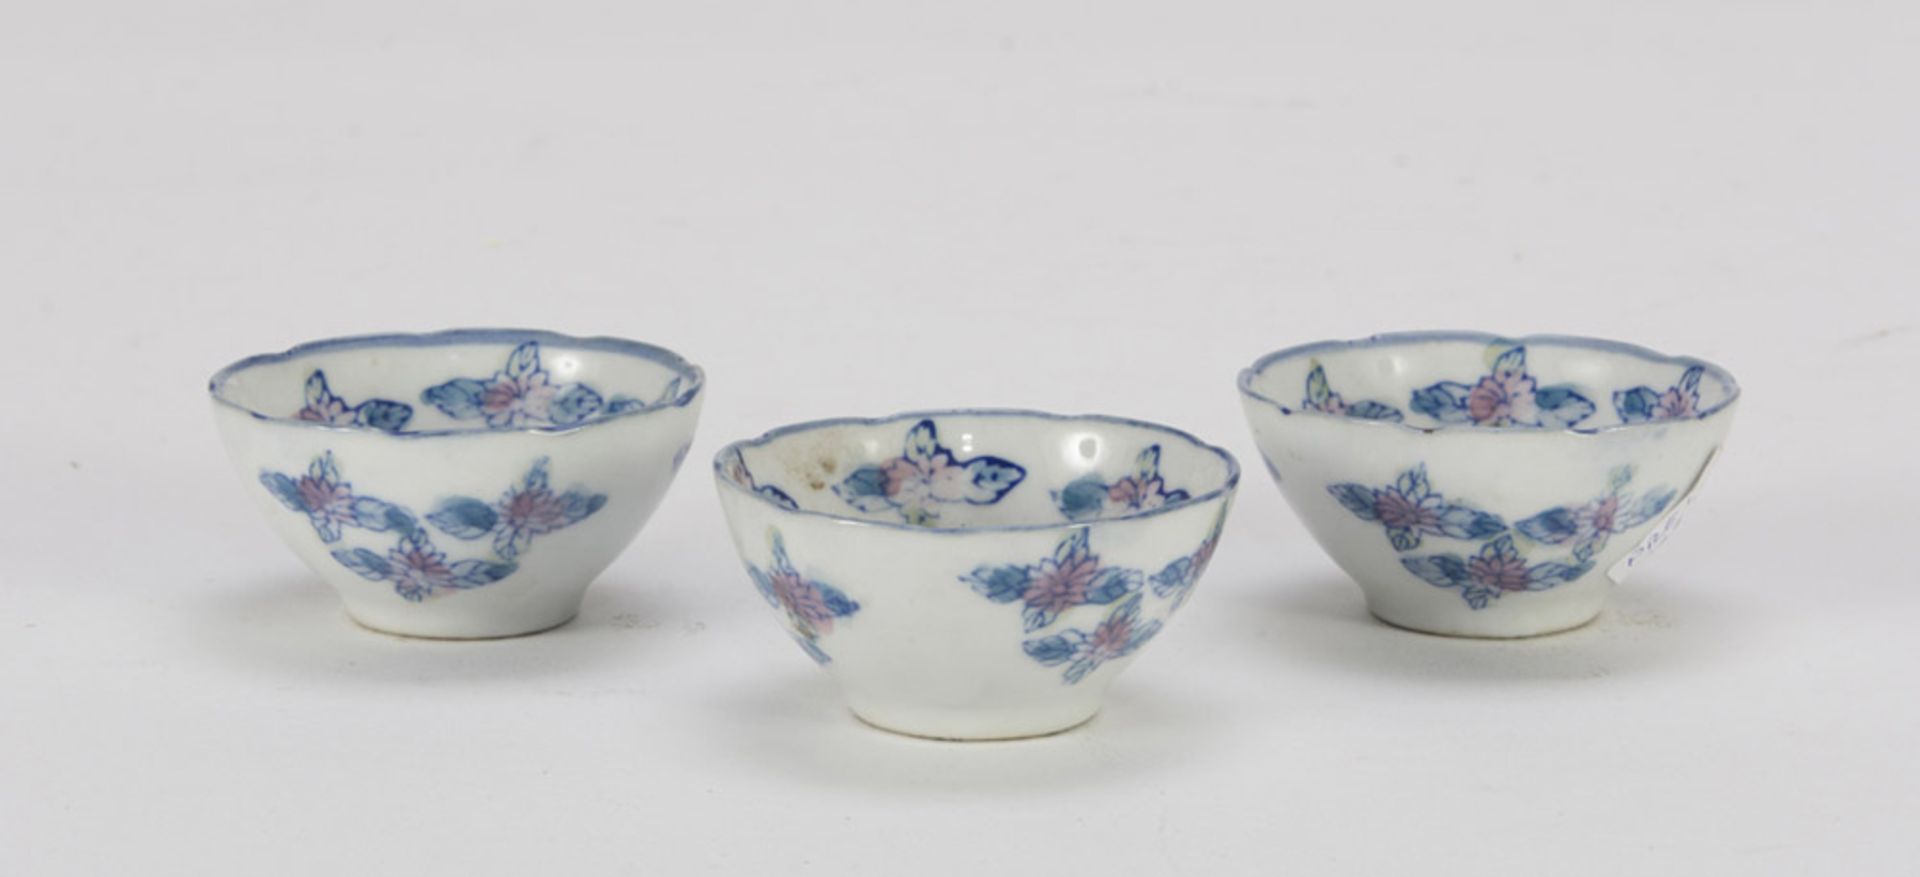 THREE SMALL SAKÈ CUPS IN PORCELAIN, CHINA 20TH CENTURY